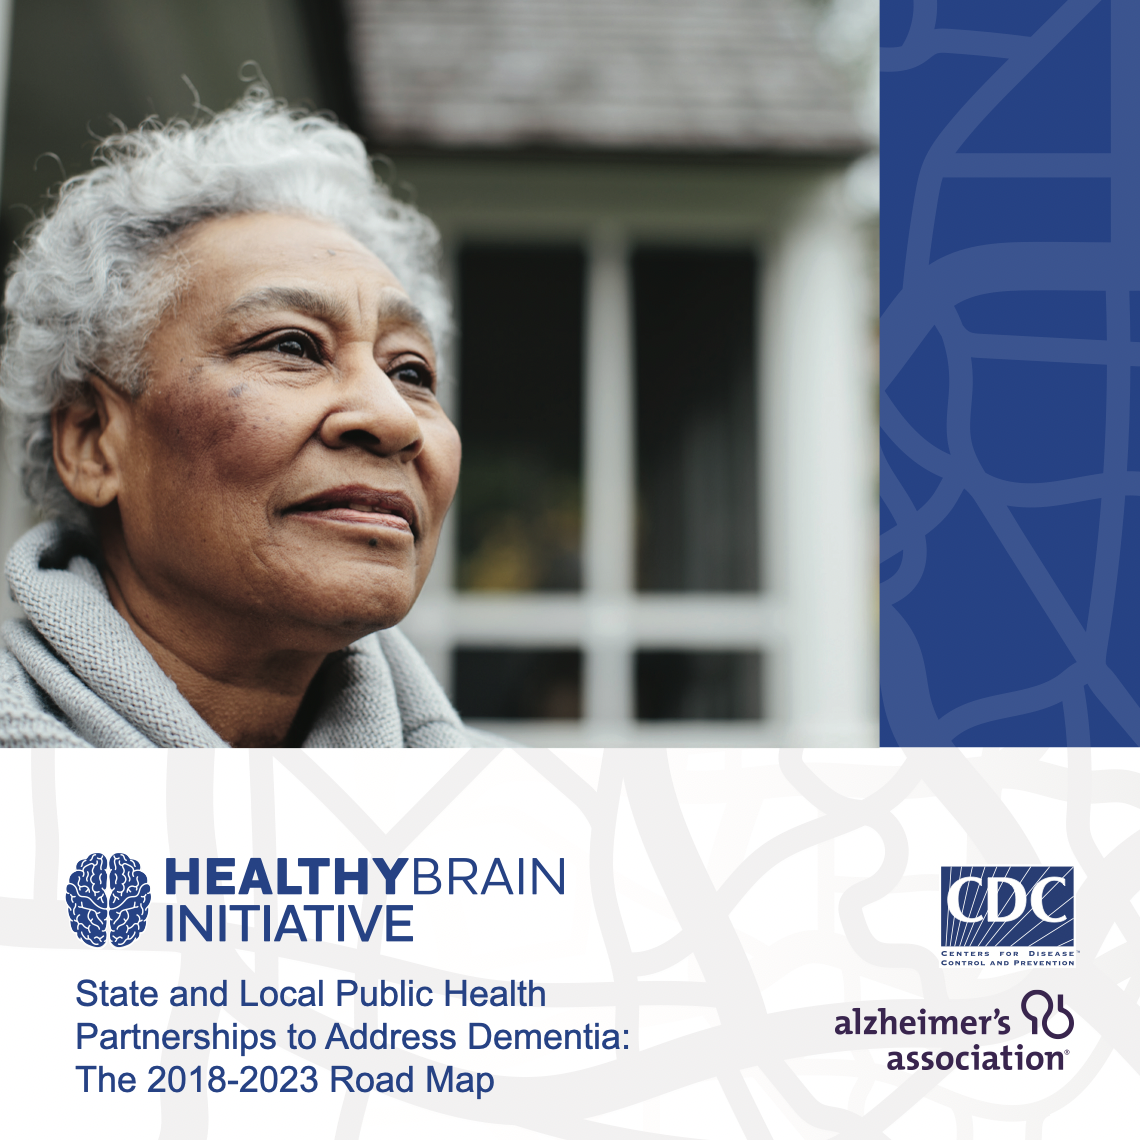 Healthy Brain Initiative. State and Local Public Health Partnerships to Address Dementia: The 2018-2023 Road Map (CDC)